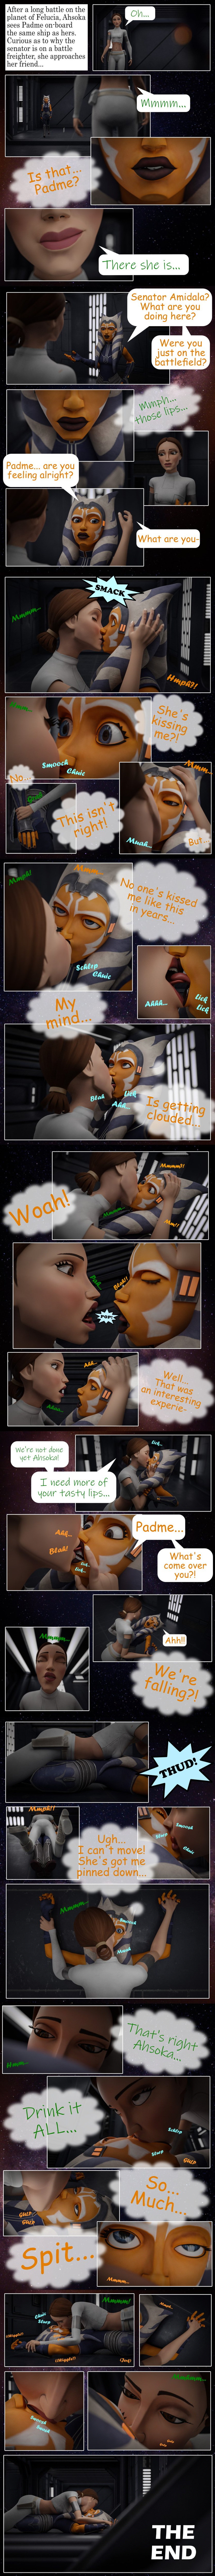 2girls 3d adult_and_teenager adult_woman_and_teen_girl age_difference ahsoka_tano blender clone_wars colchia comic delicious_spit disney domination drinking_spit dubious_consent female female_only forced_kiss forced_yuri french_kiss french_kissing human interspecies kissing makeout no_self_control older_woman_and_teenage_girl padme_amidala pinned pinned_down rape saliva_swap star_wars submissive swallowing_spit teenage_girl the_clone_wars:_season_seven togruta tongue until_they_like_it wanting_more yuri